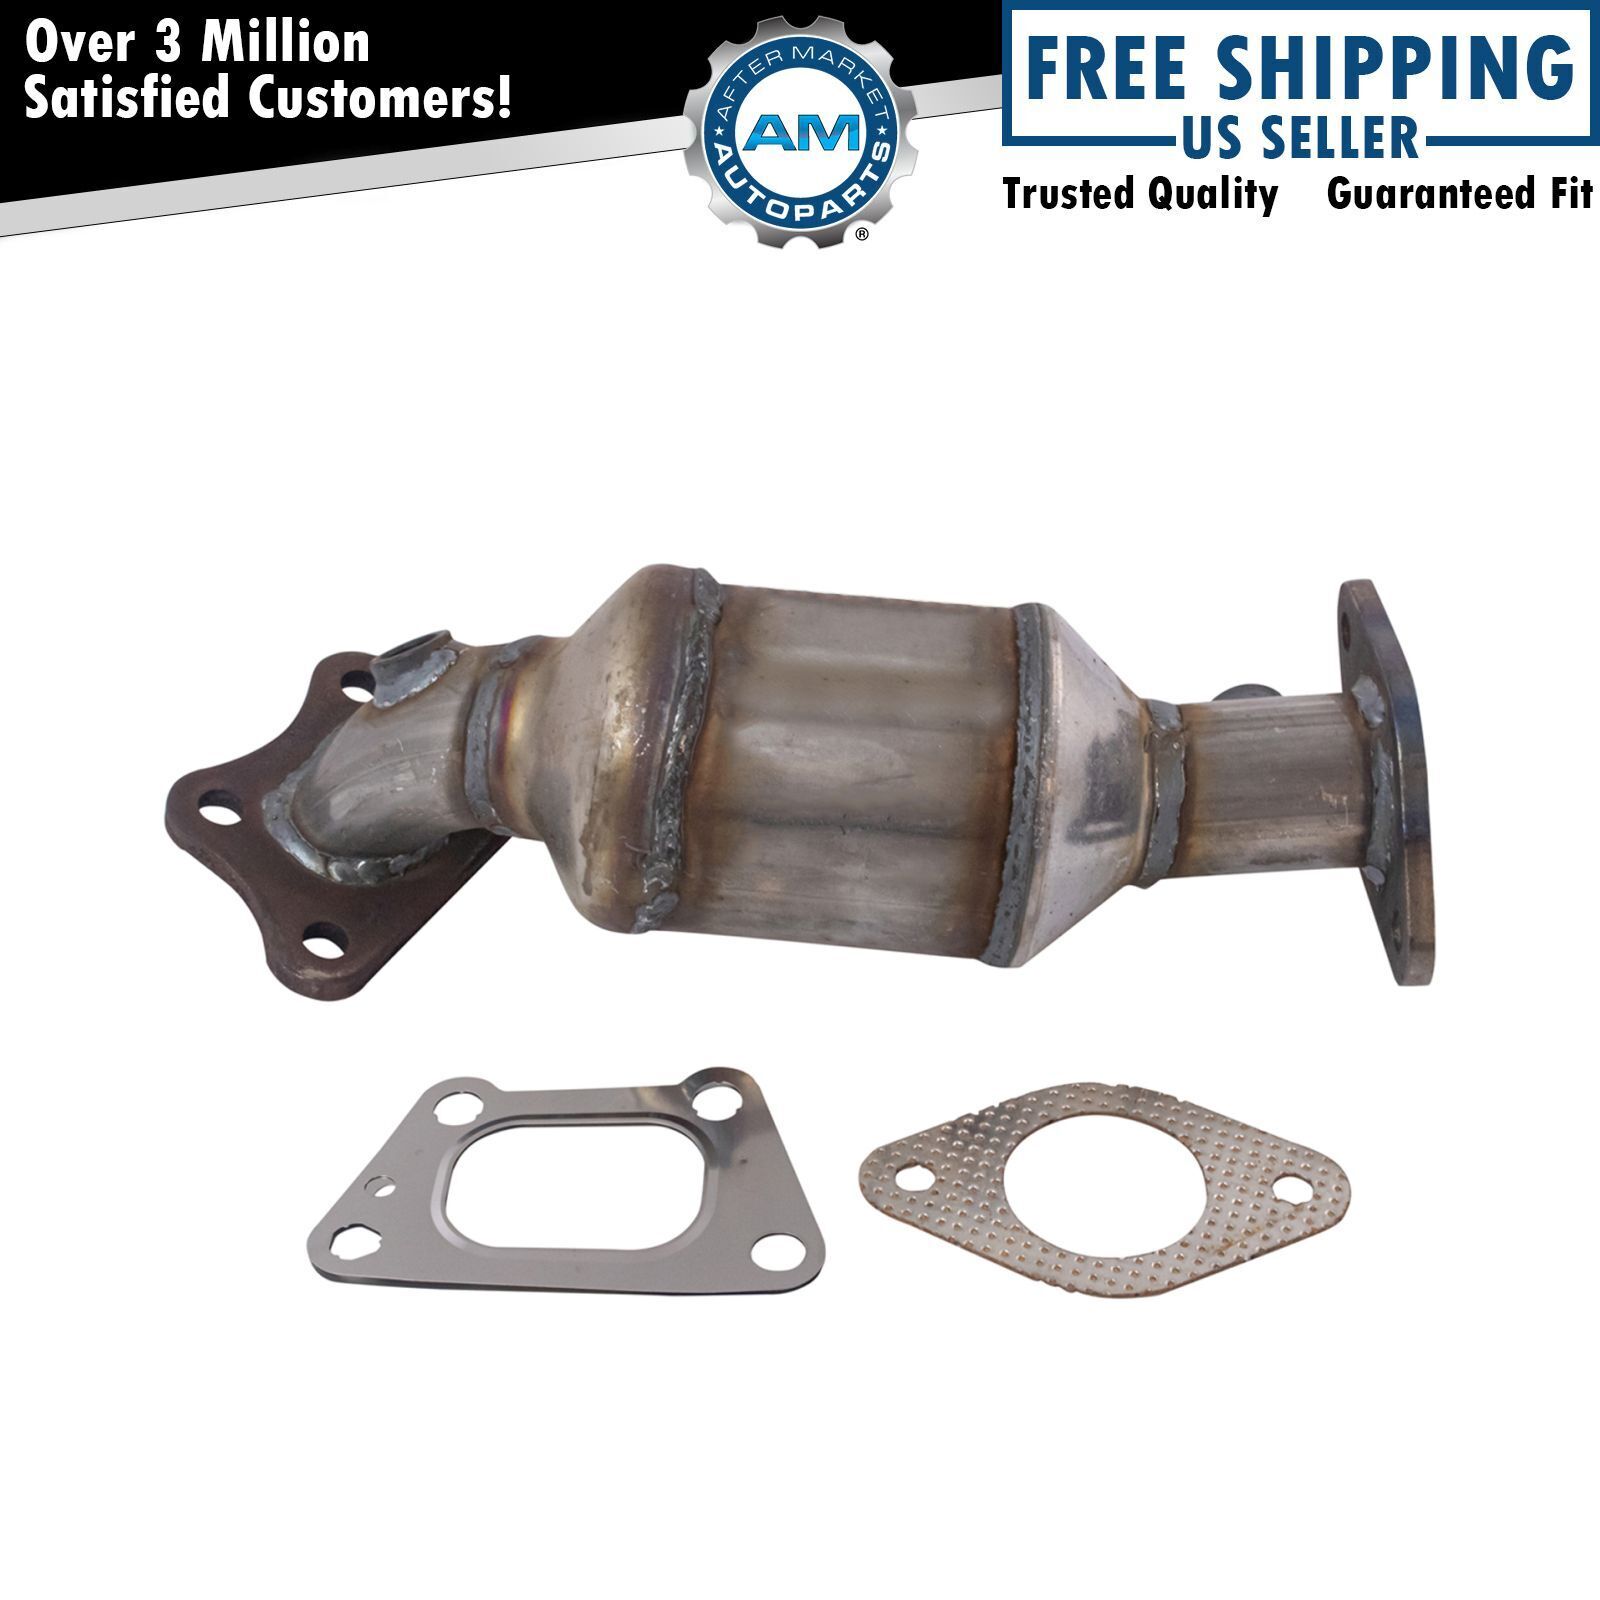 Rear Firewall Side Exhaust Manifold Catalytic Converter for 10-11 Cadillac SRX